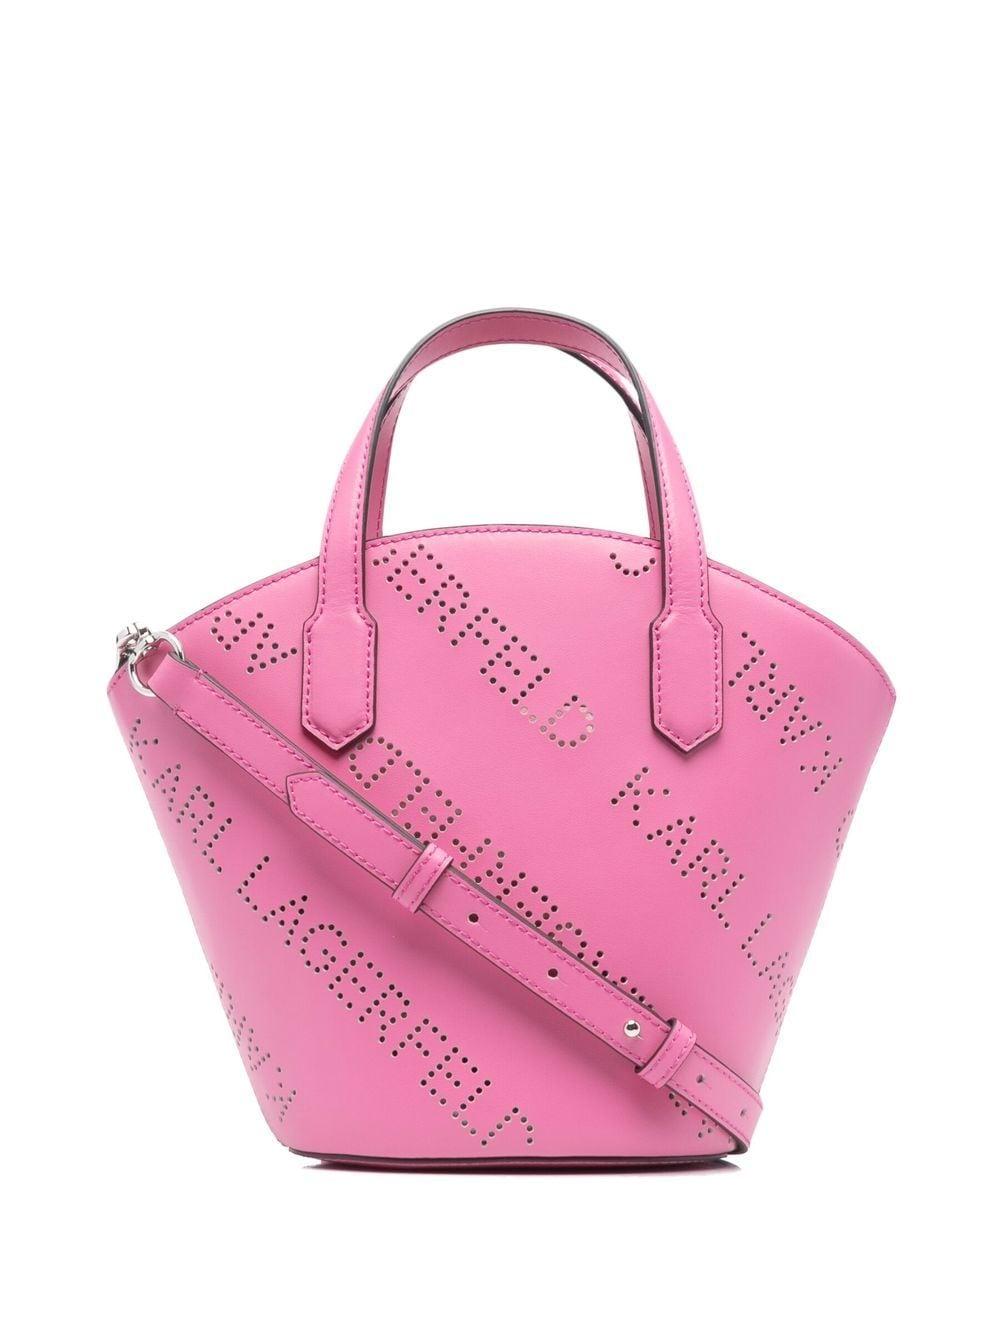 Karl Lagerfeld Leather Small K/punched Tote Bag in Pink | Lyst